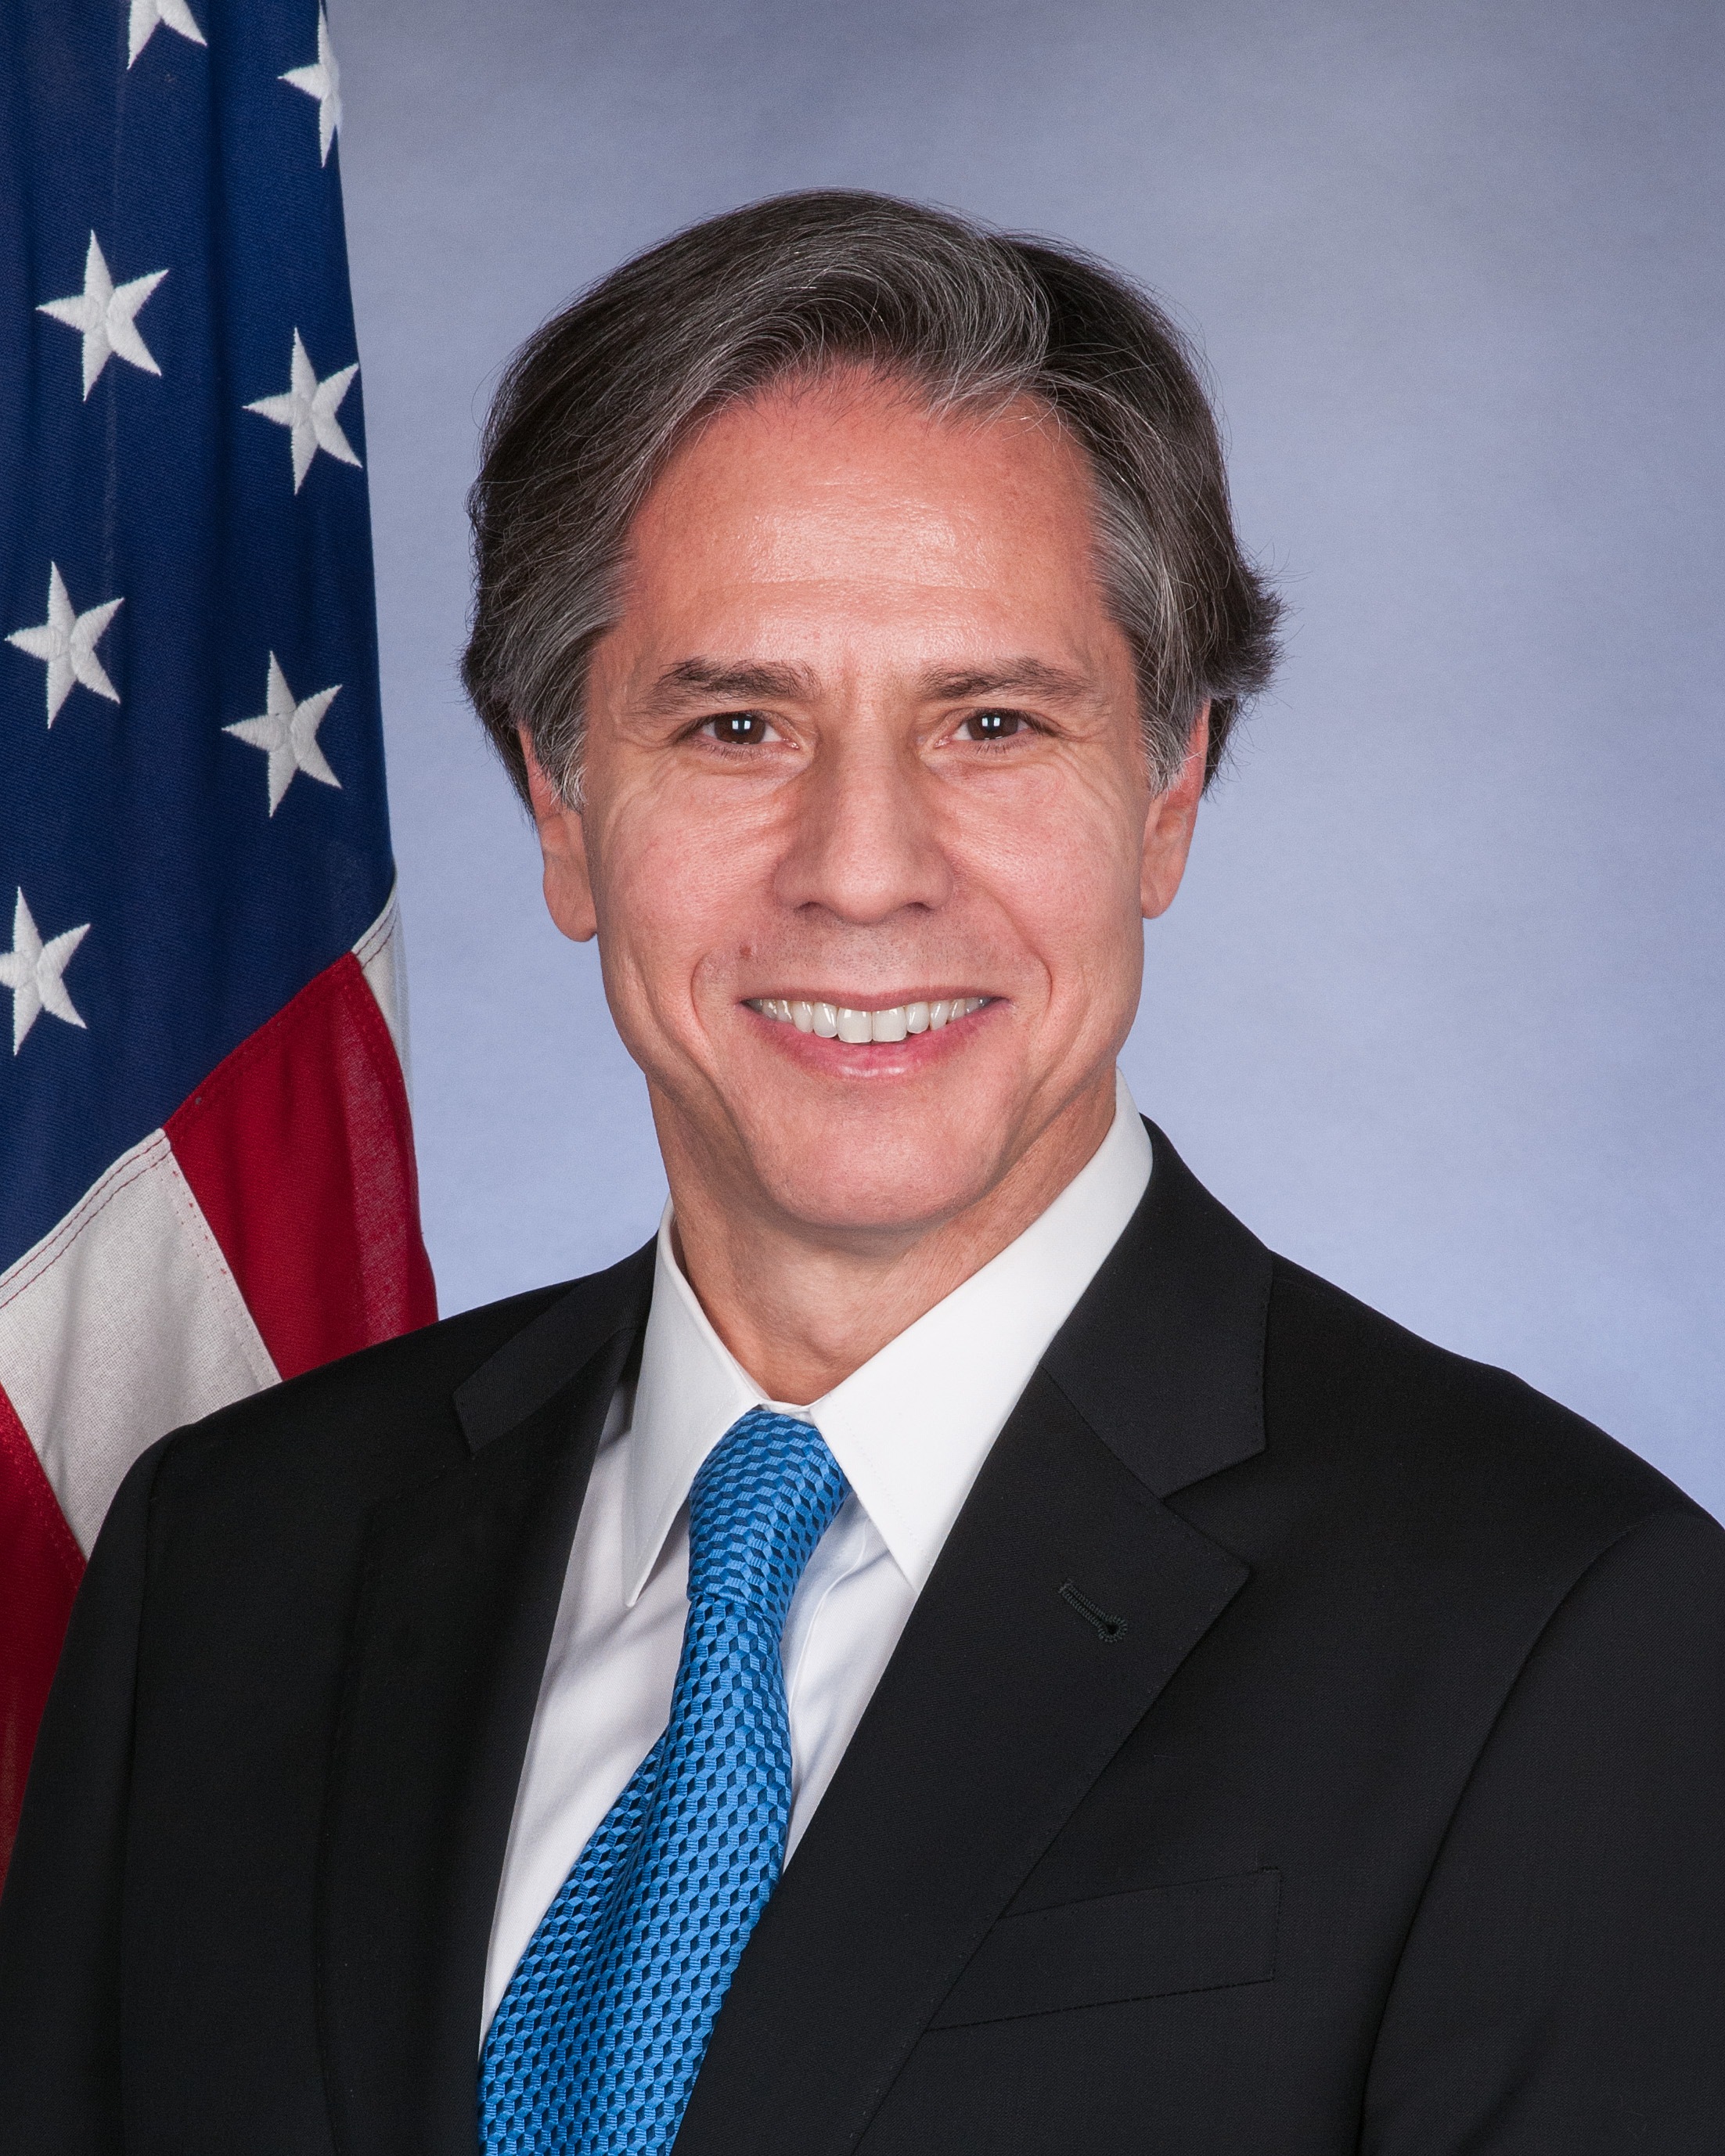 Antony Blinken poses in the classic government shot: blue suit and tie in front of an American flag